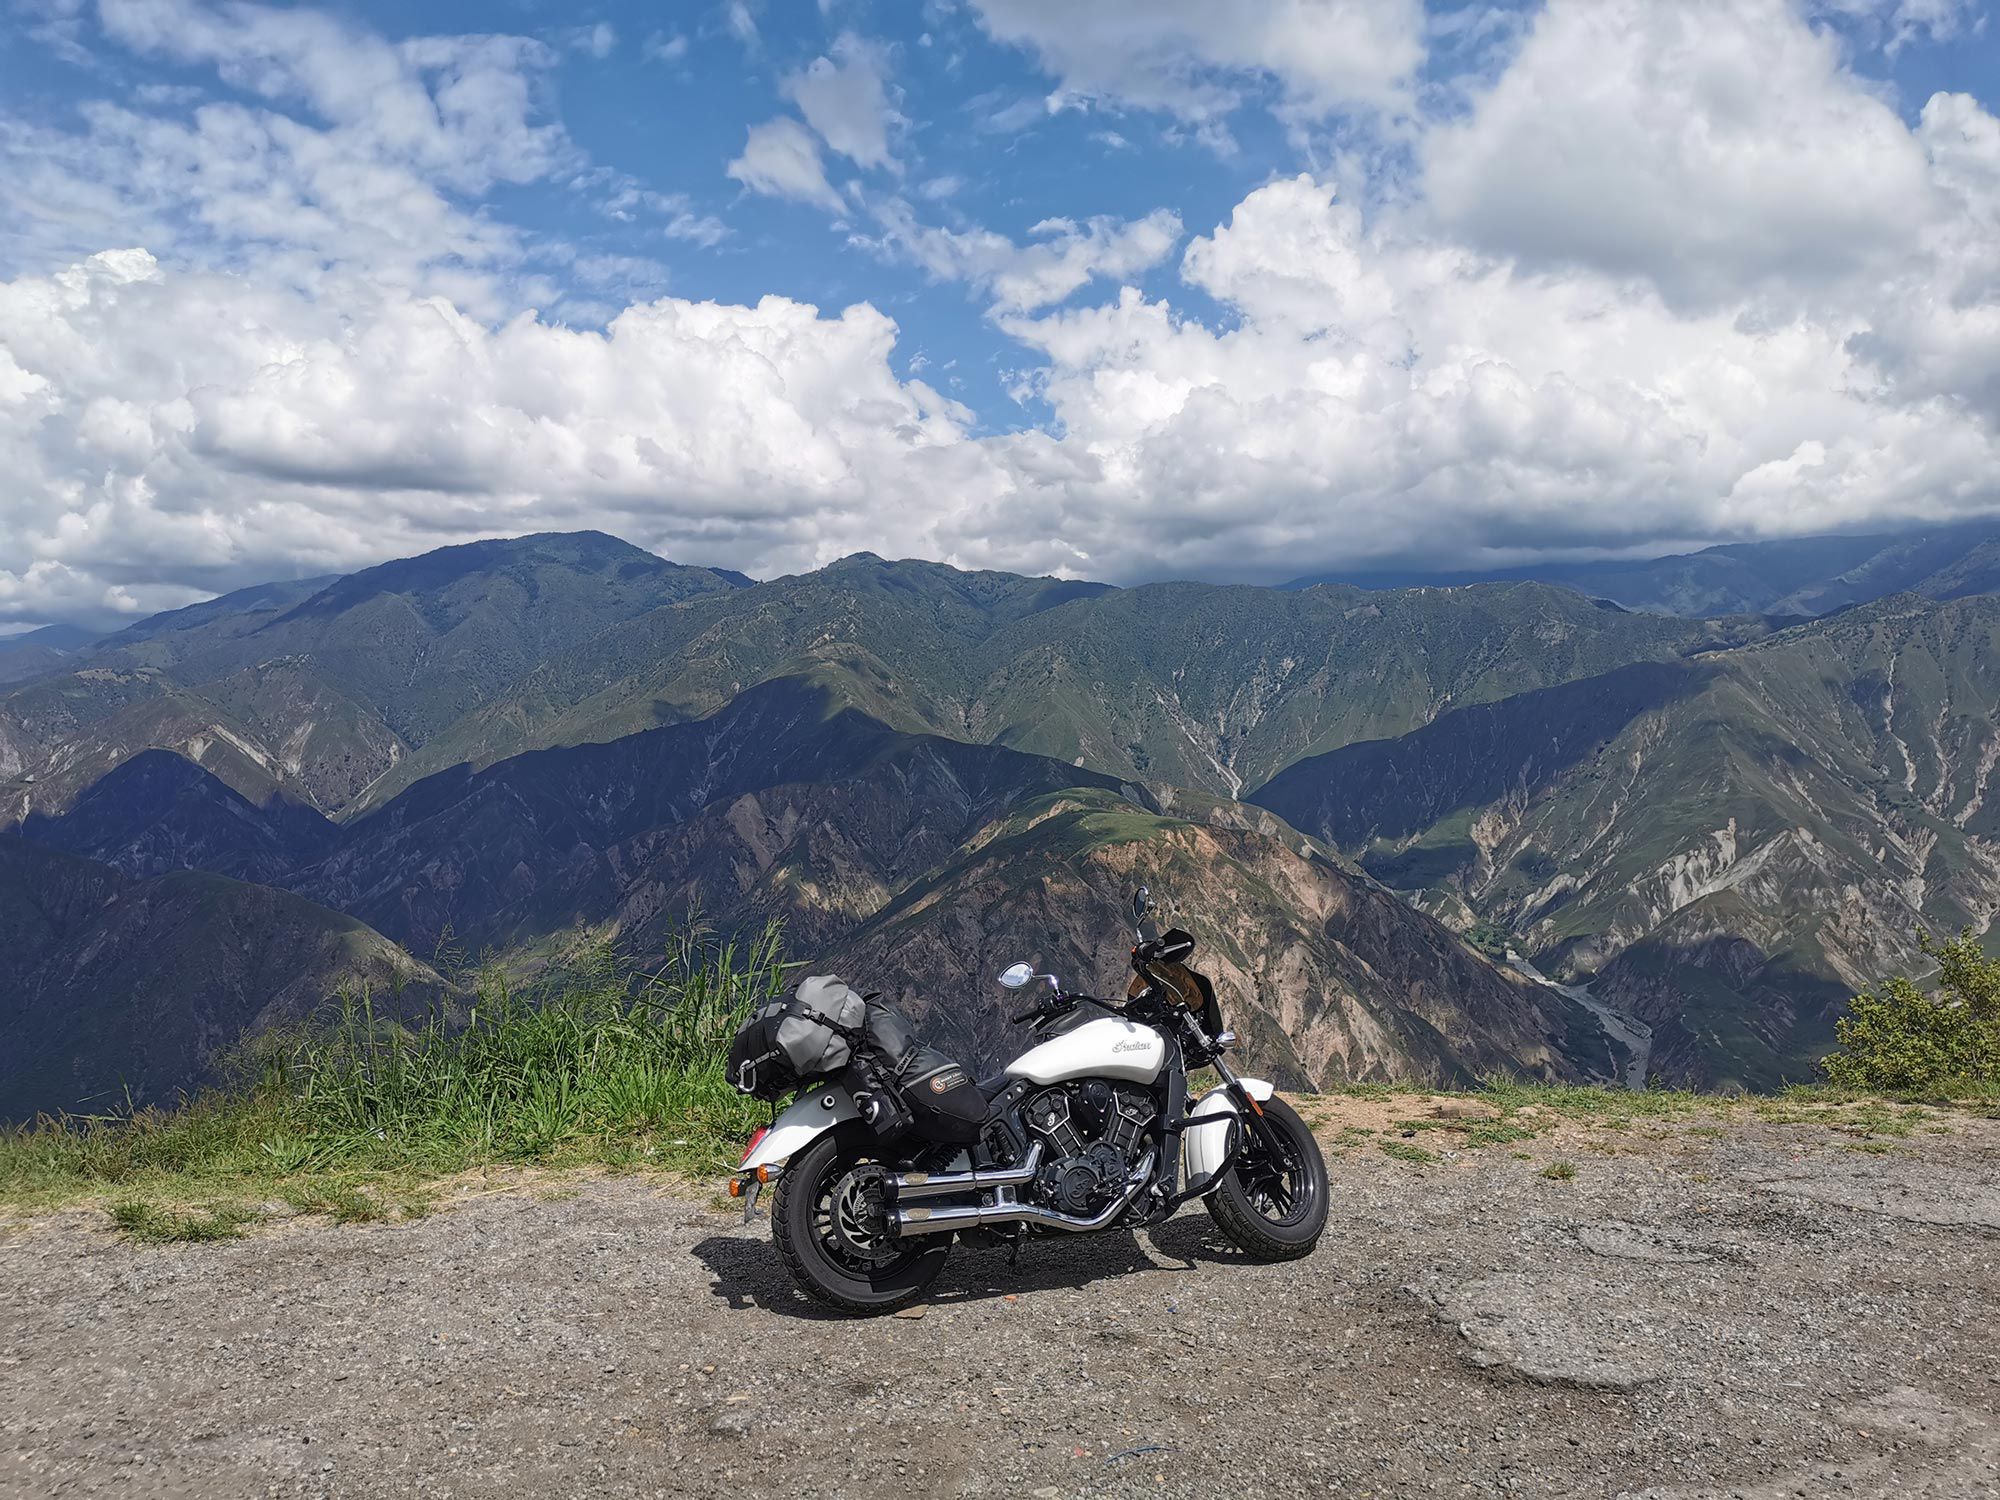 After riding more than 10,000 miles through Colombia, I can say the Chicamocha Canyon road has made its way to the top of my “best paved roads” list.